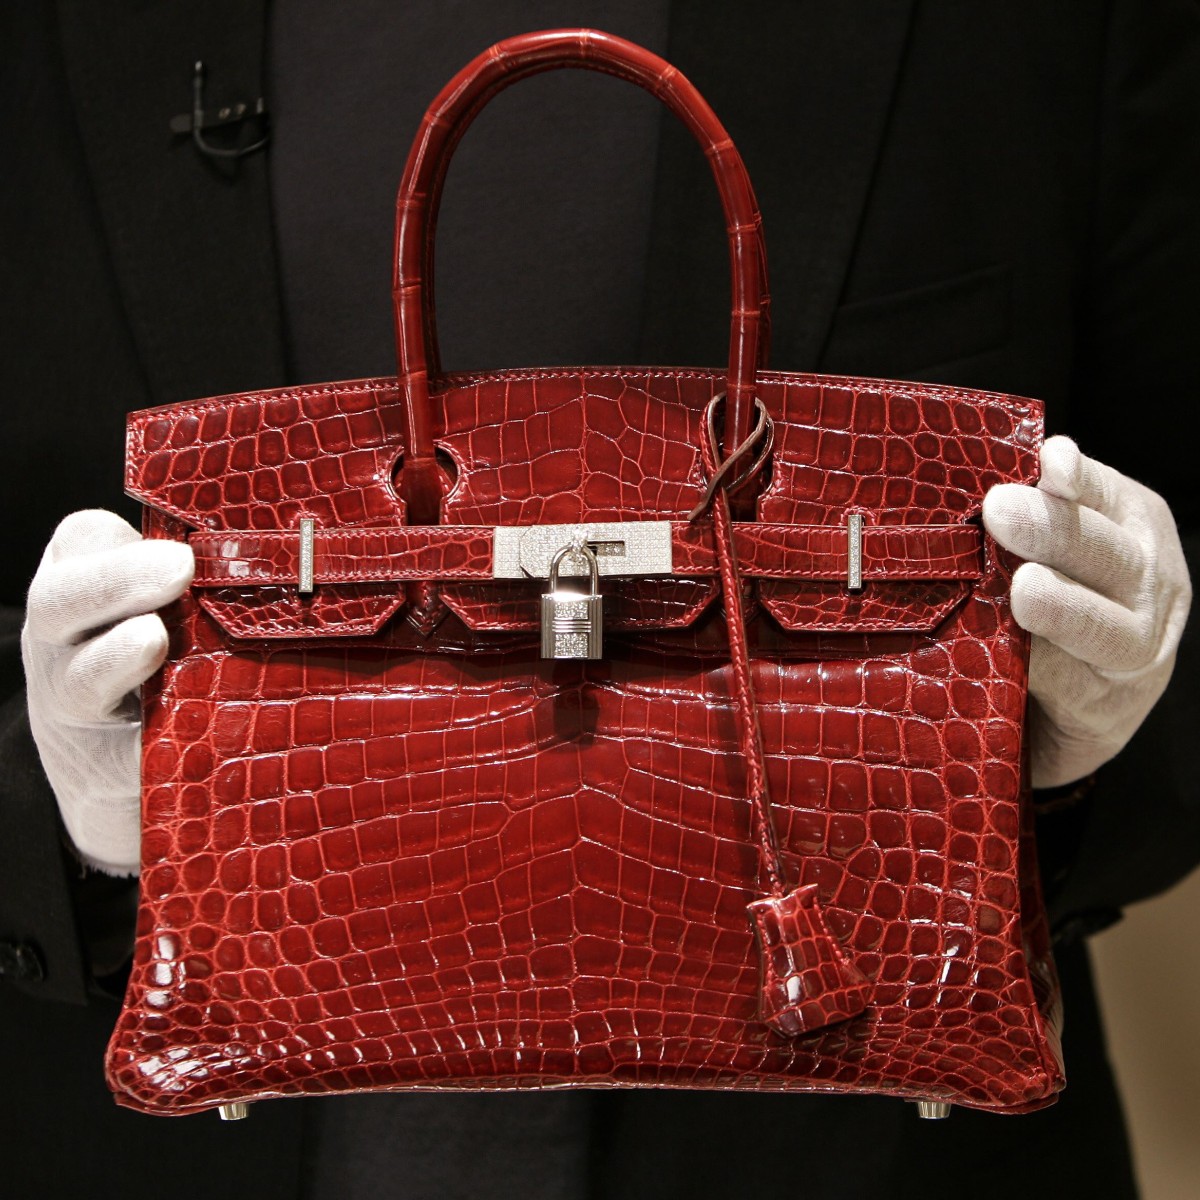 Luxury shoppers are increasingly seeking vintage, and it's killing